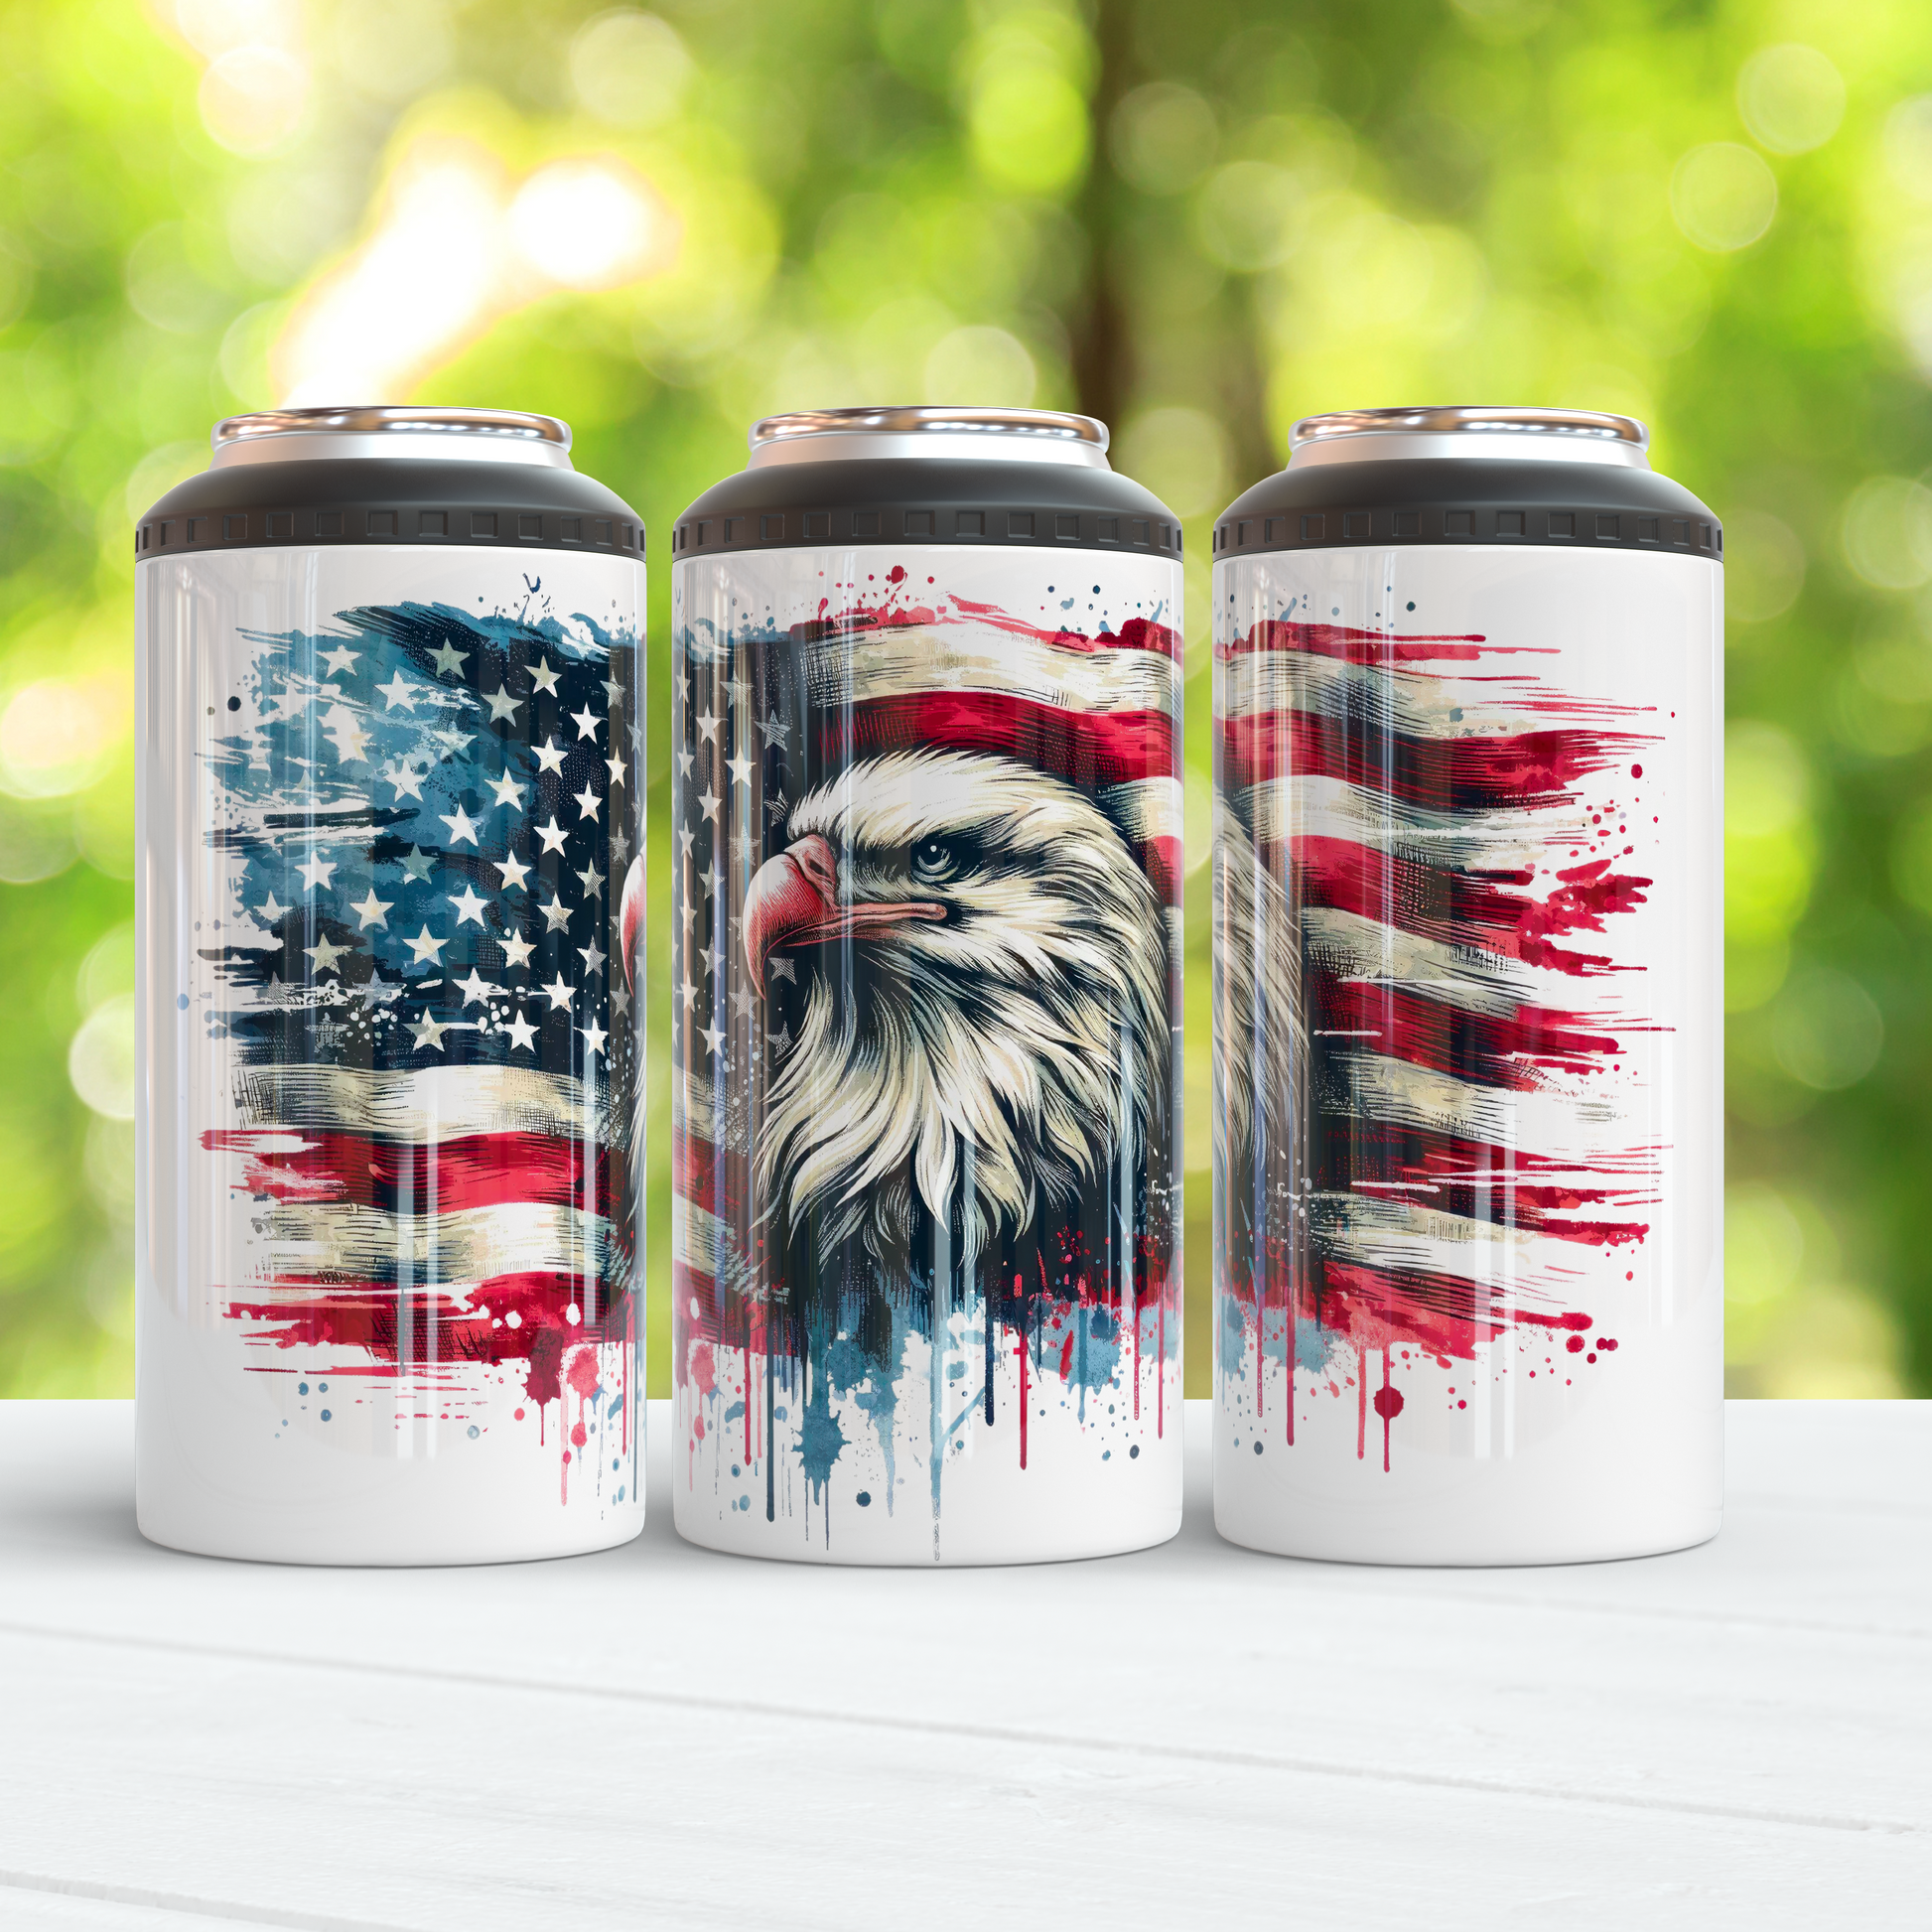 American eagle 4-in-1 slim can cooler. -Mayan Sub Shop